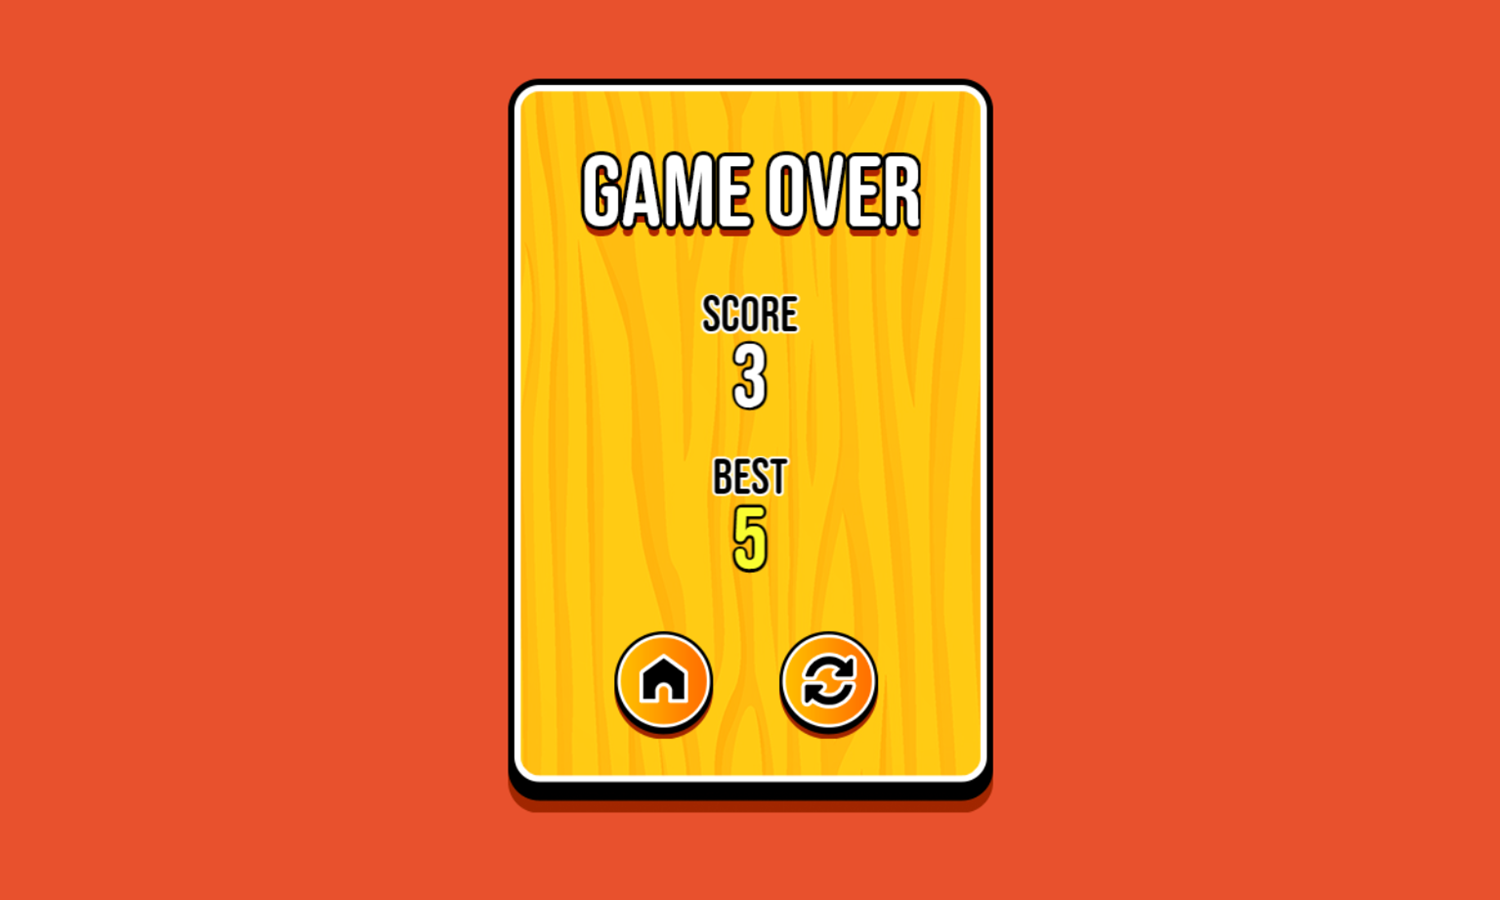 Grab The Cookie Game Over Screen Screenshot.